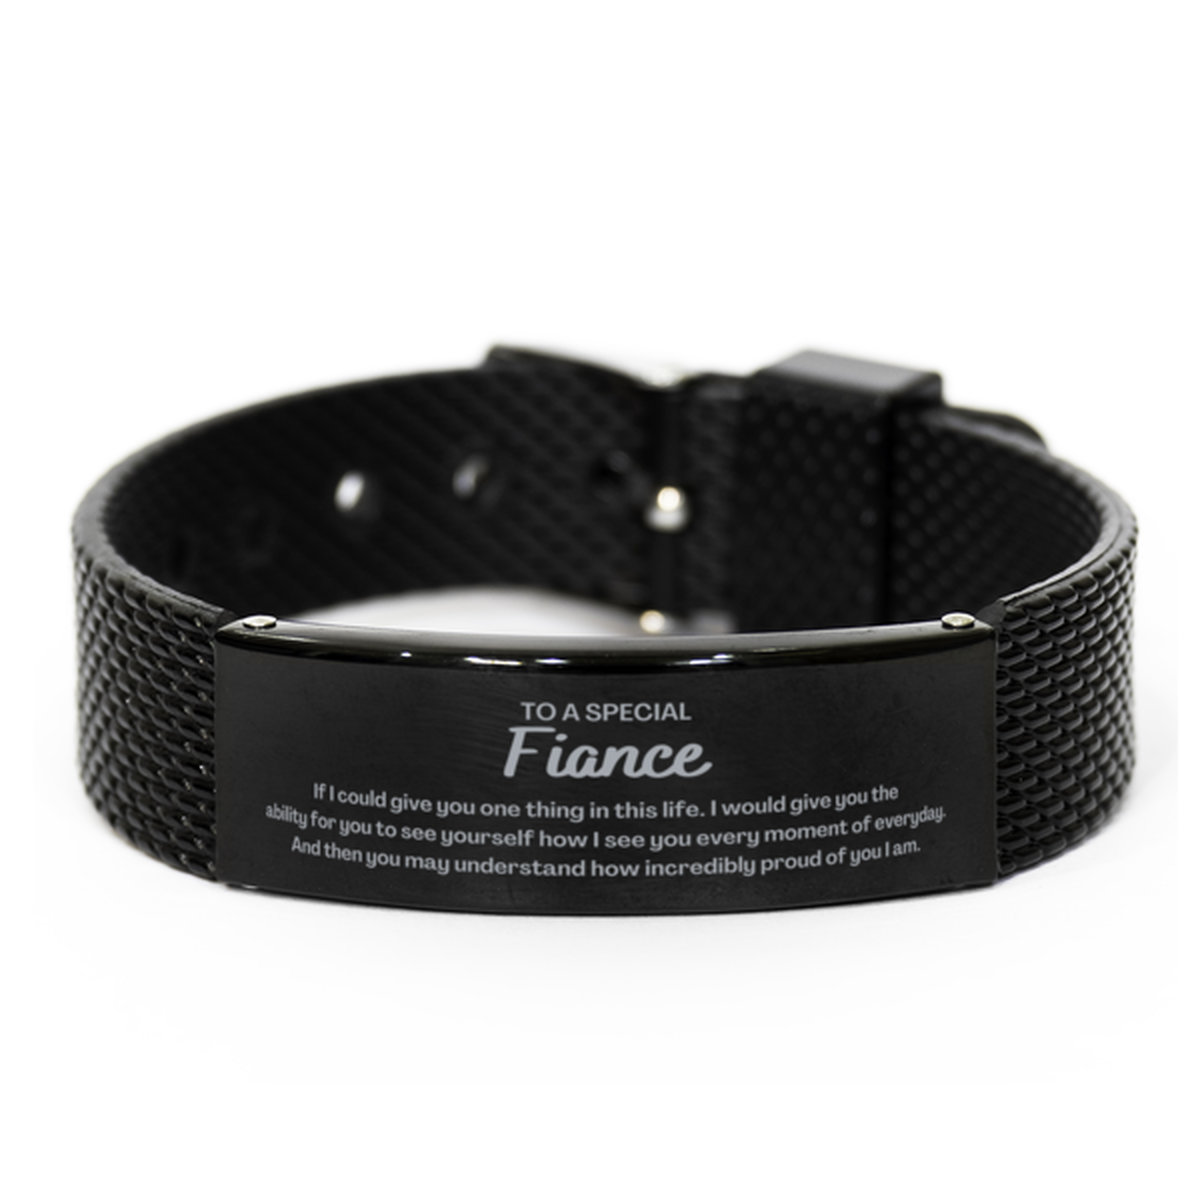 To My Fiance Black Shark Mesh Bracelet, Gifts For Fiance Engraved, Inspirational Gifts for Christmas Birthday, Epic Gifts for Fiance To A Special Fiance how incredibly proud of you I am